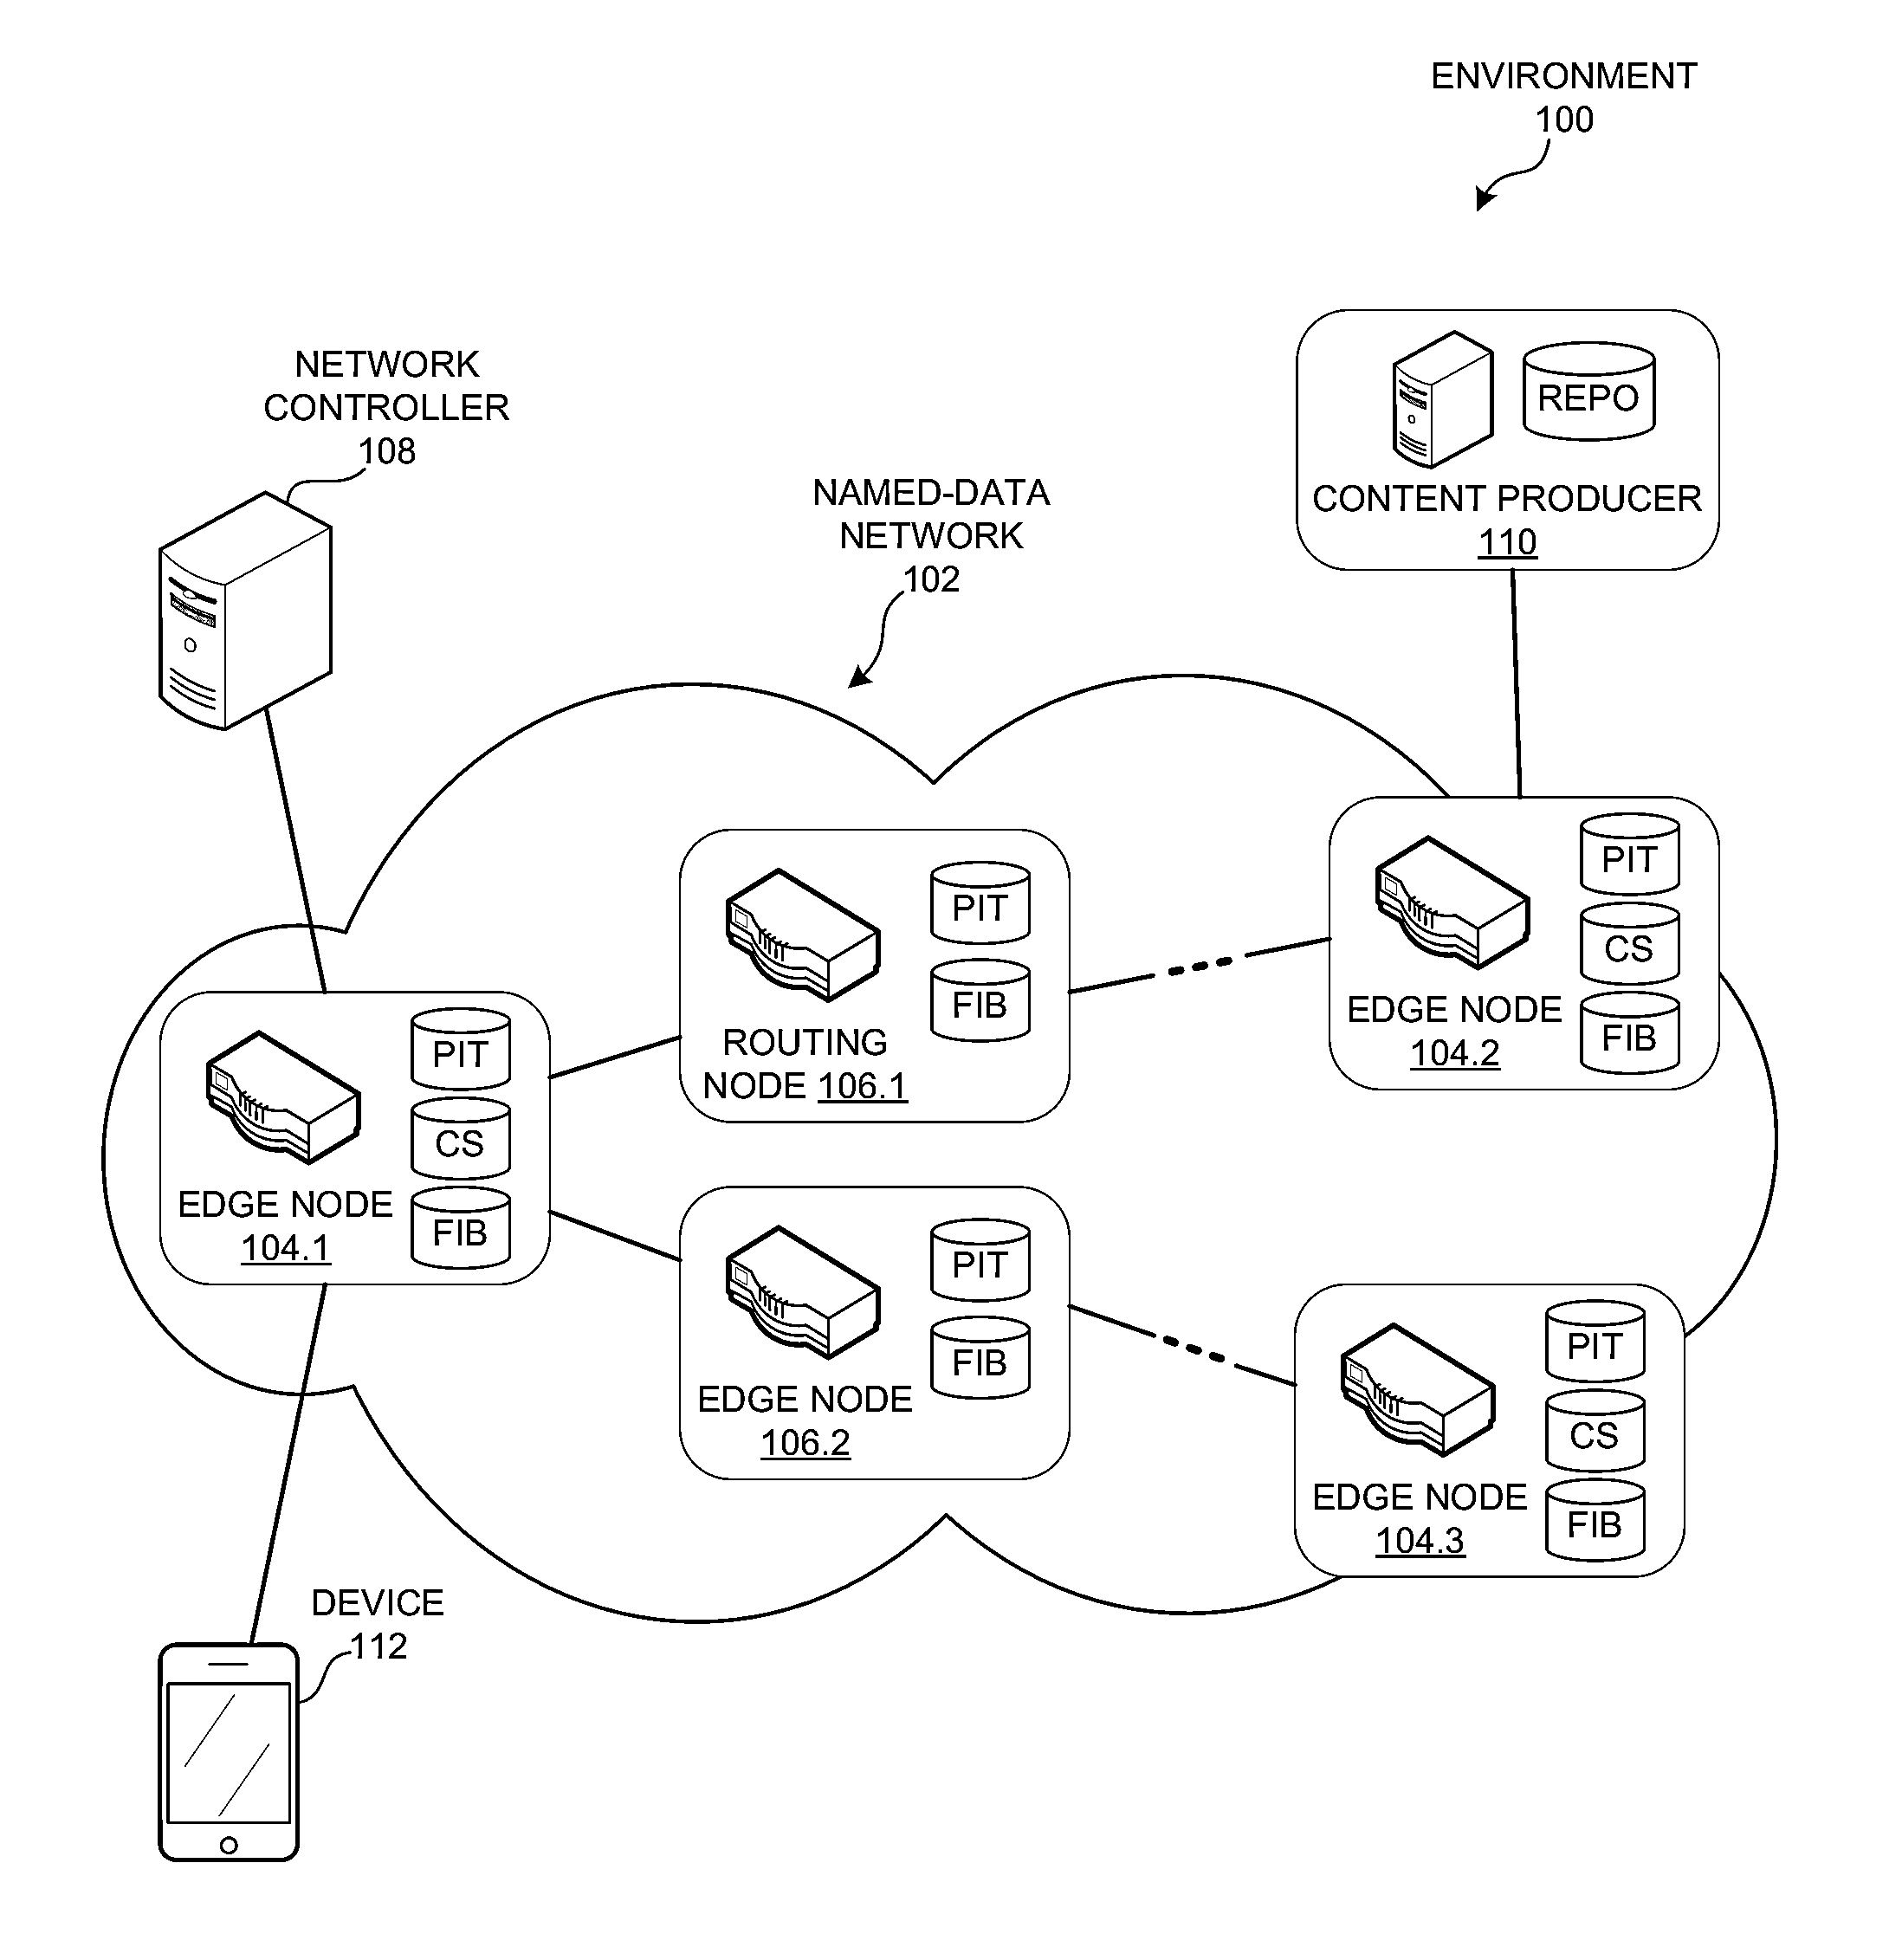 Interest messages with a payload for a named data network